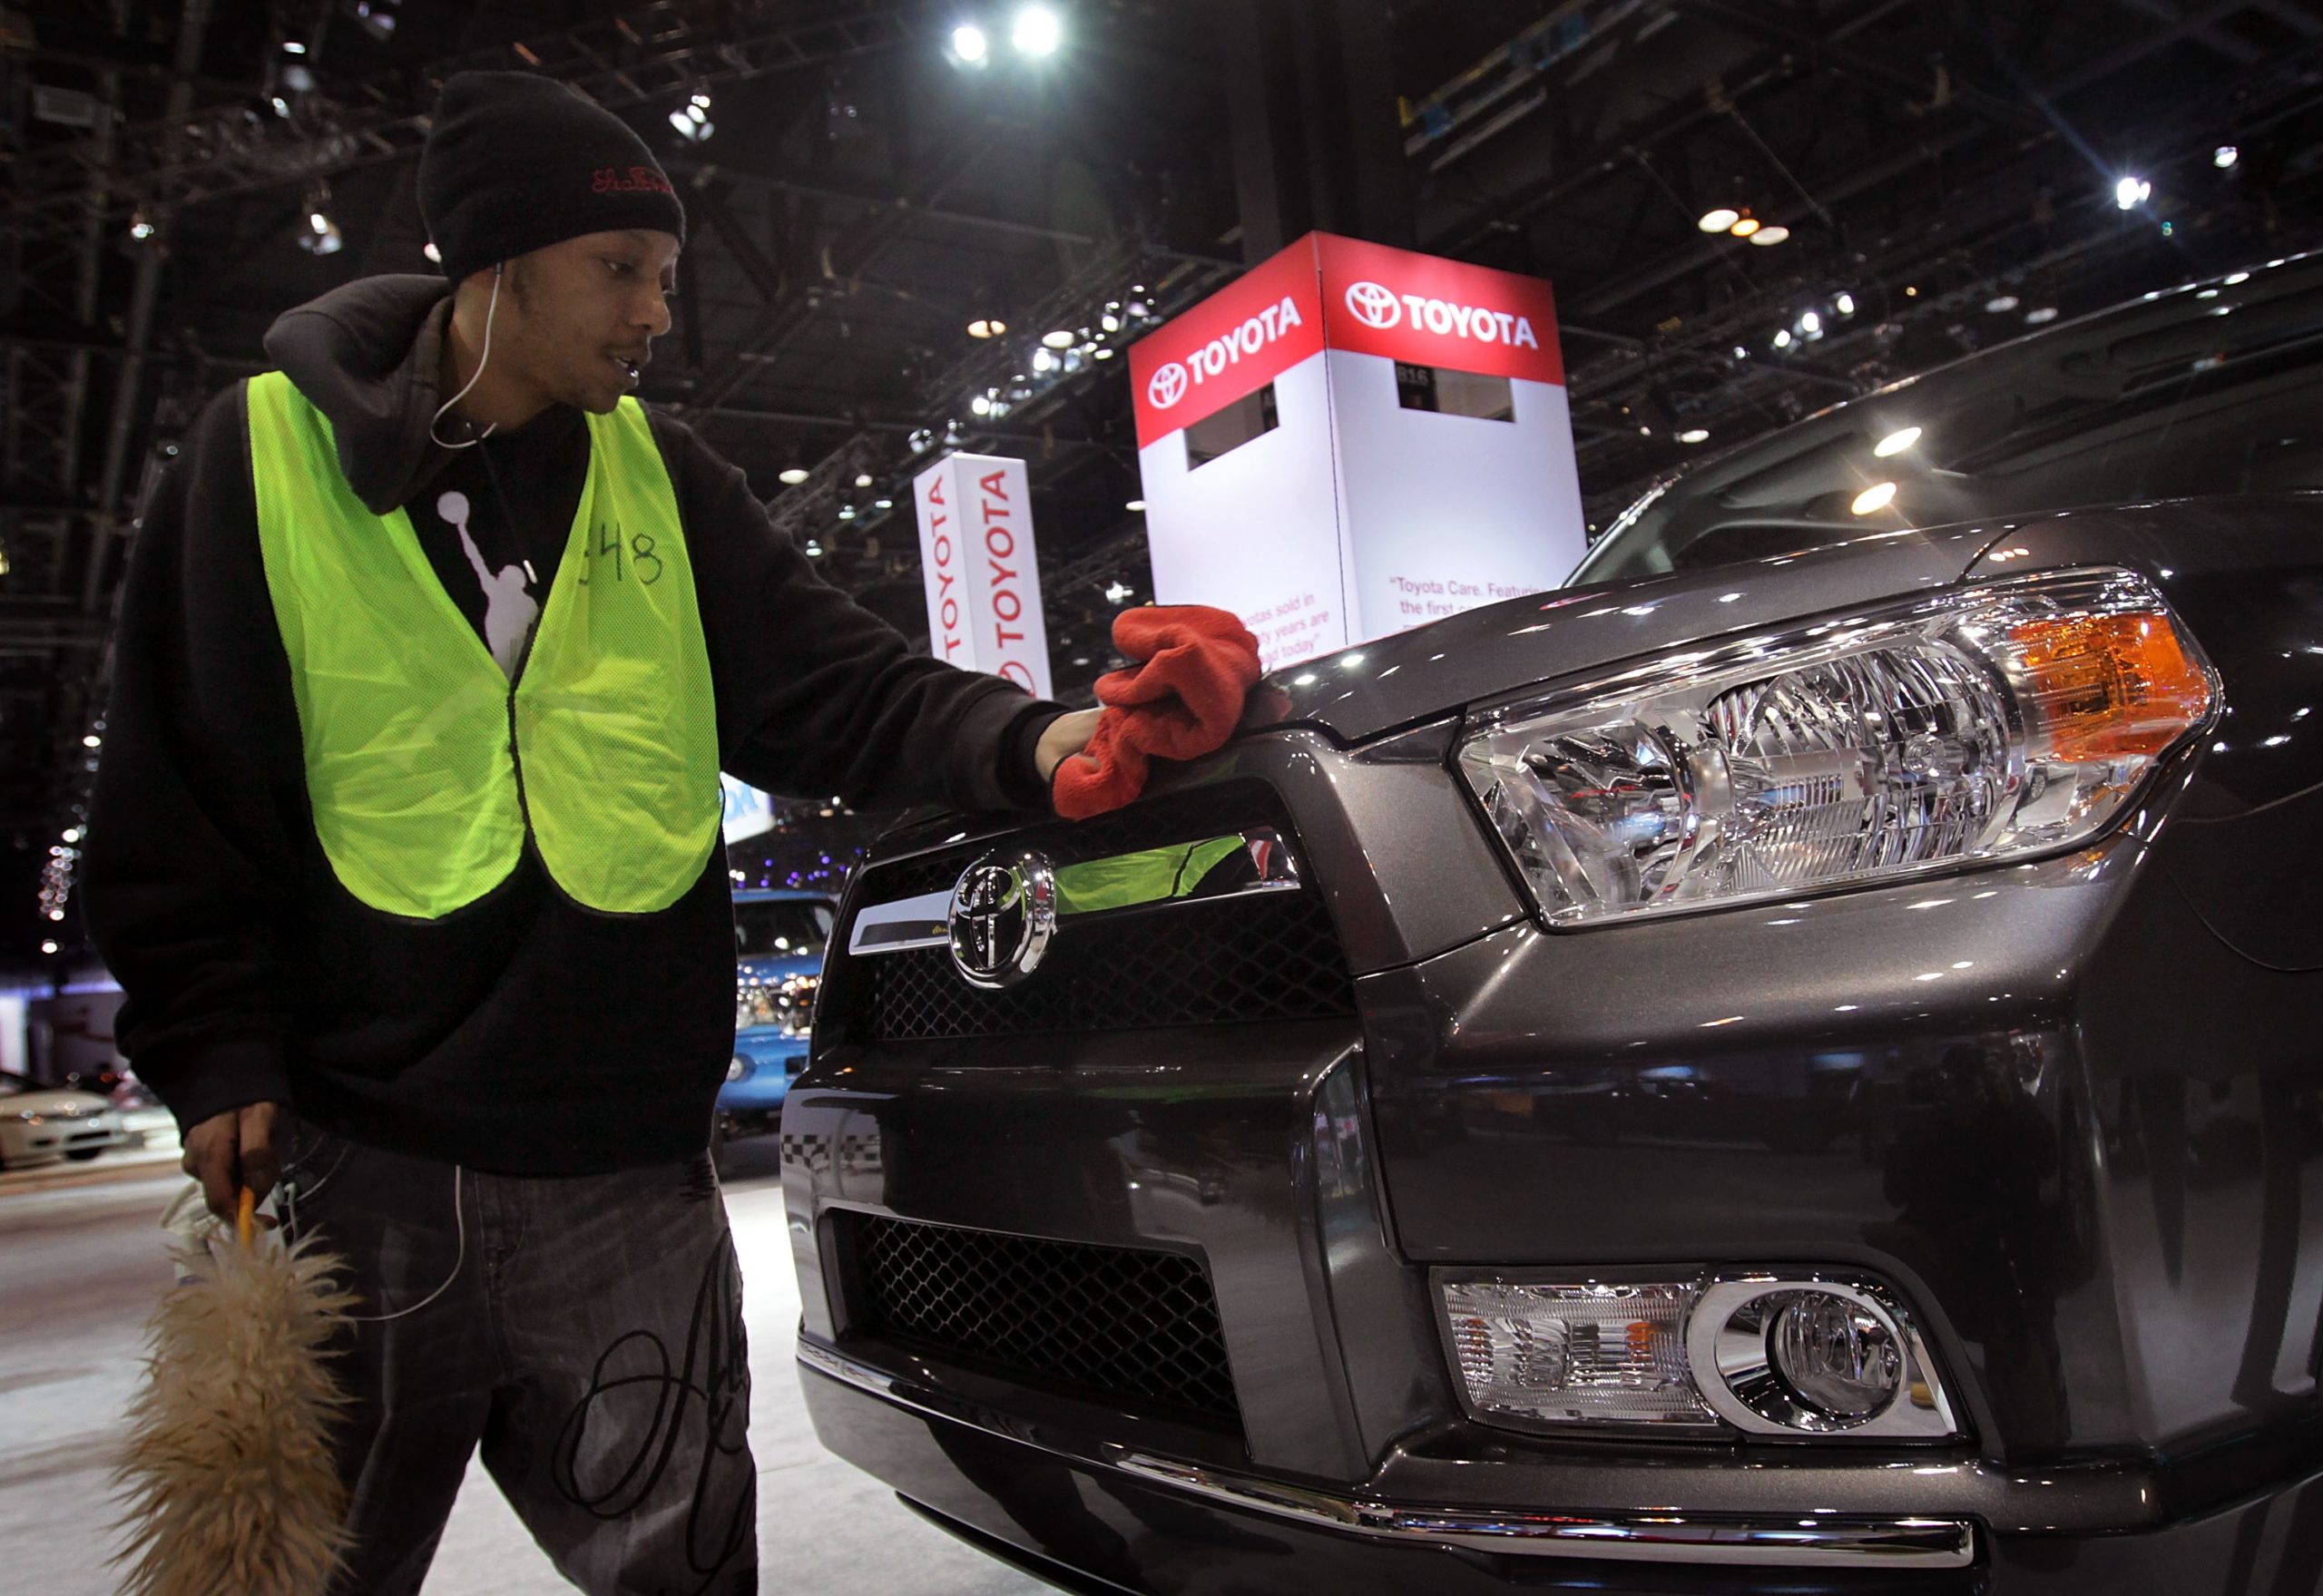 Tommie Rodgers prepares a Toyota 4Runner for display at the Chicago Auto Show on February 8, 2011